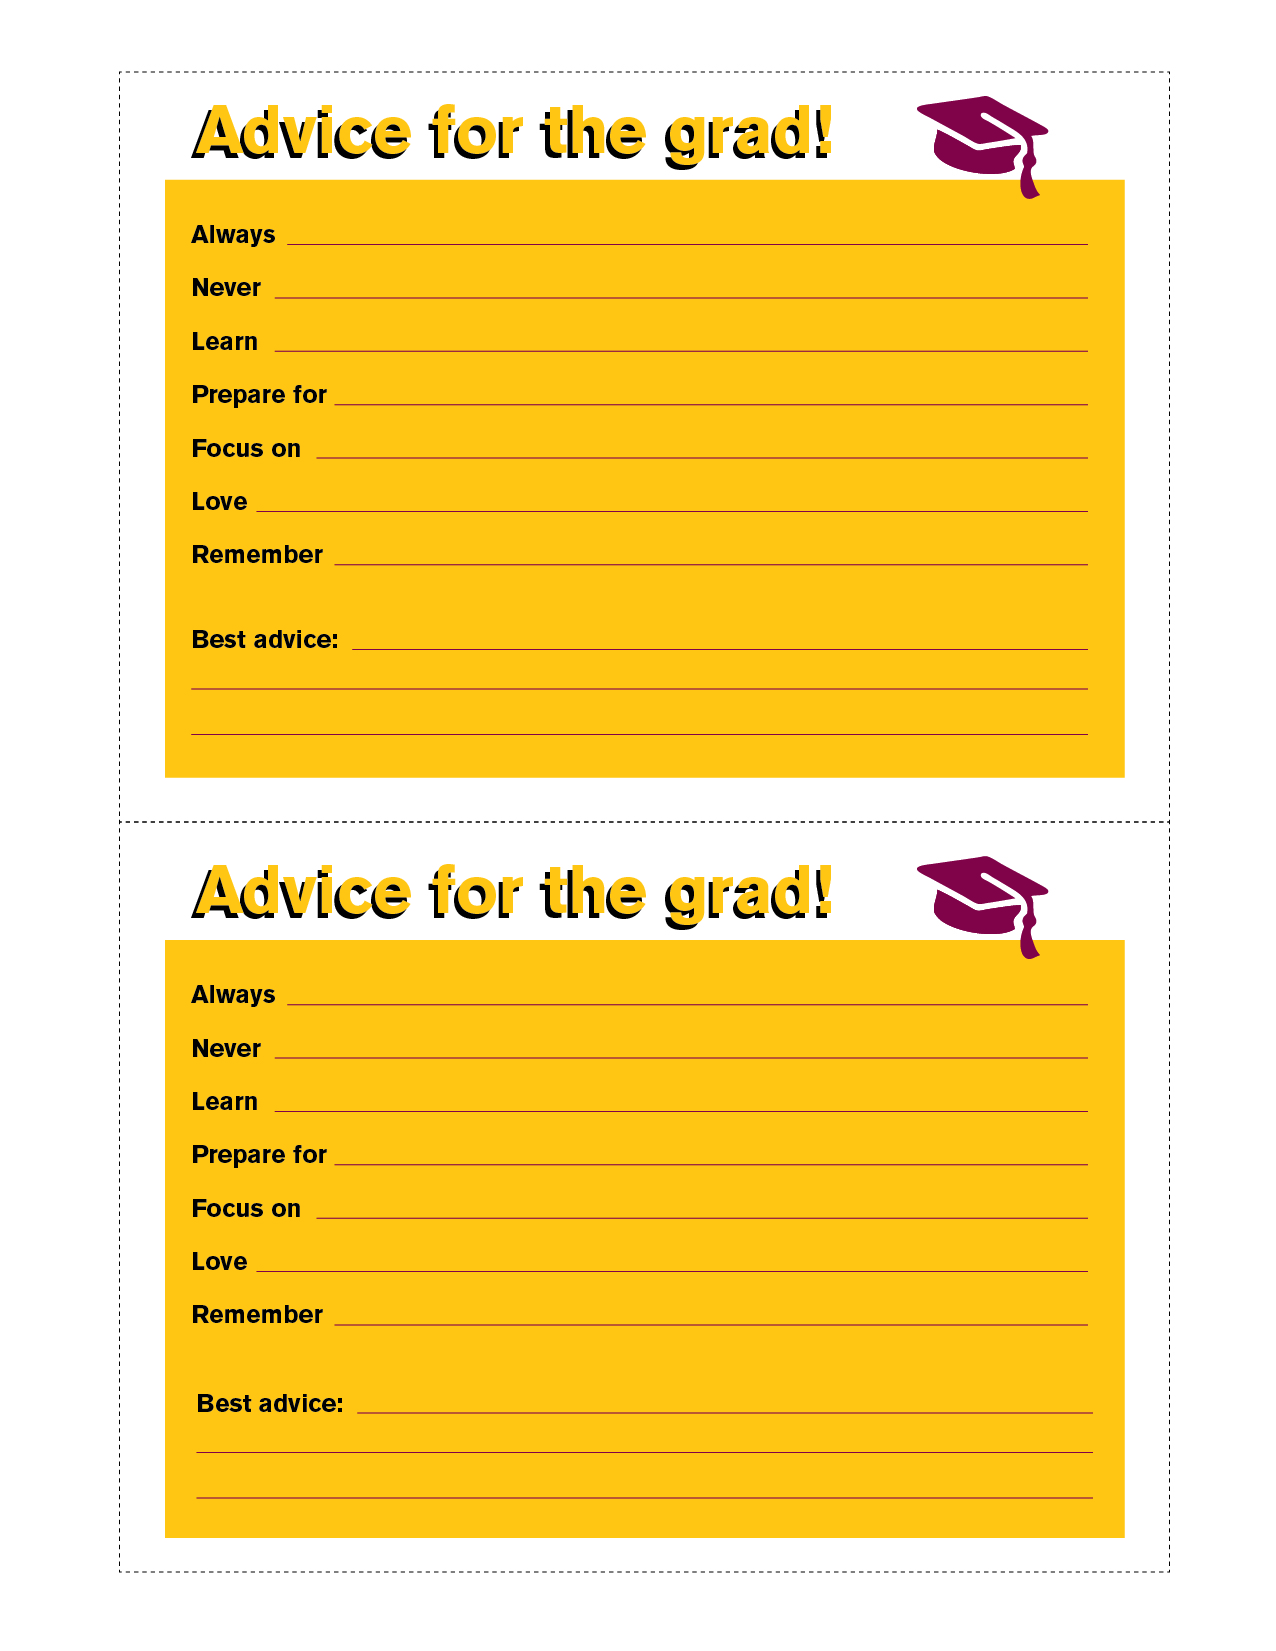 White advice for the grad card